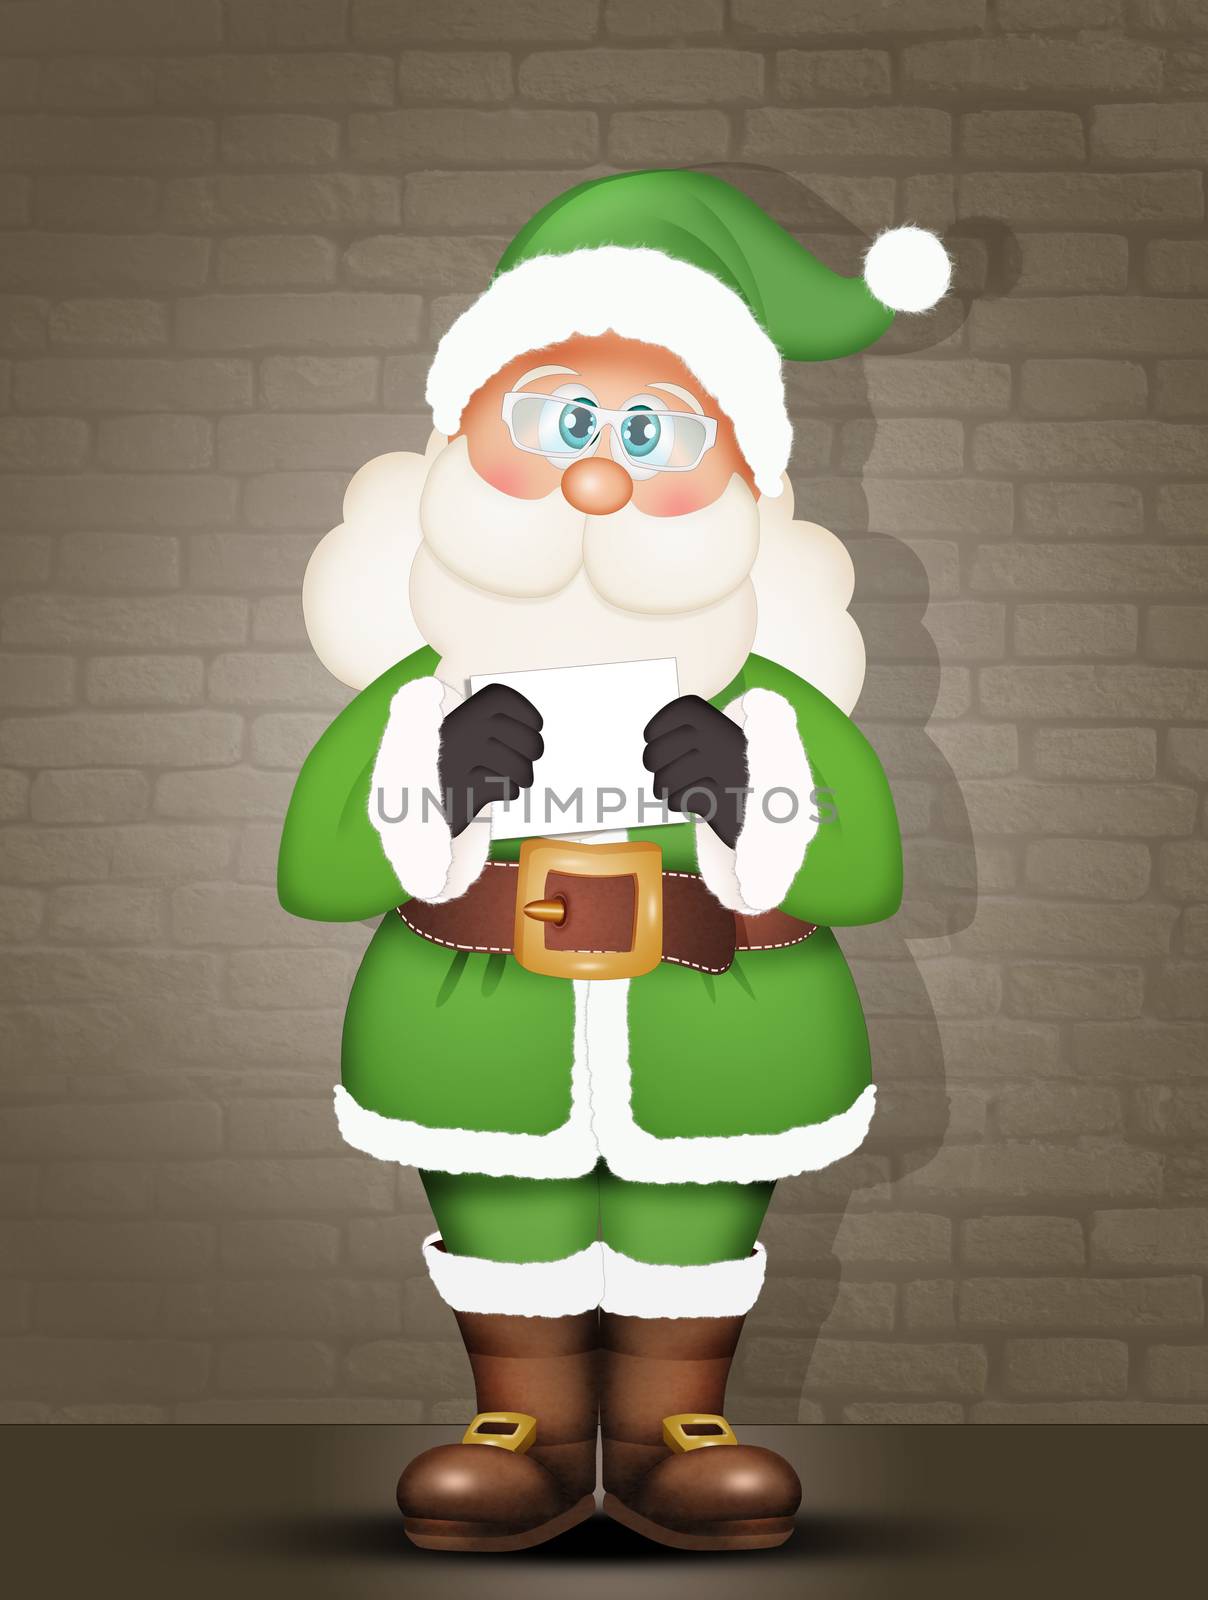 illustration of Santa Claus arrested by adrenalina